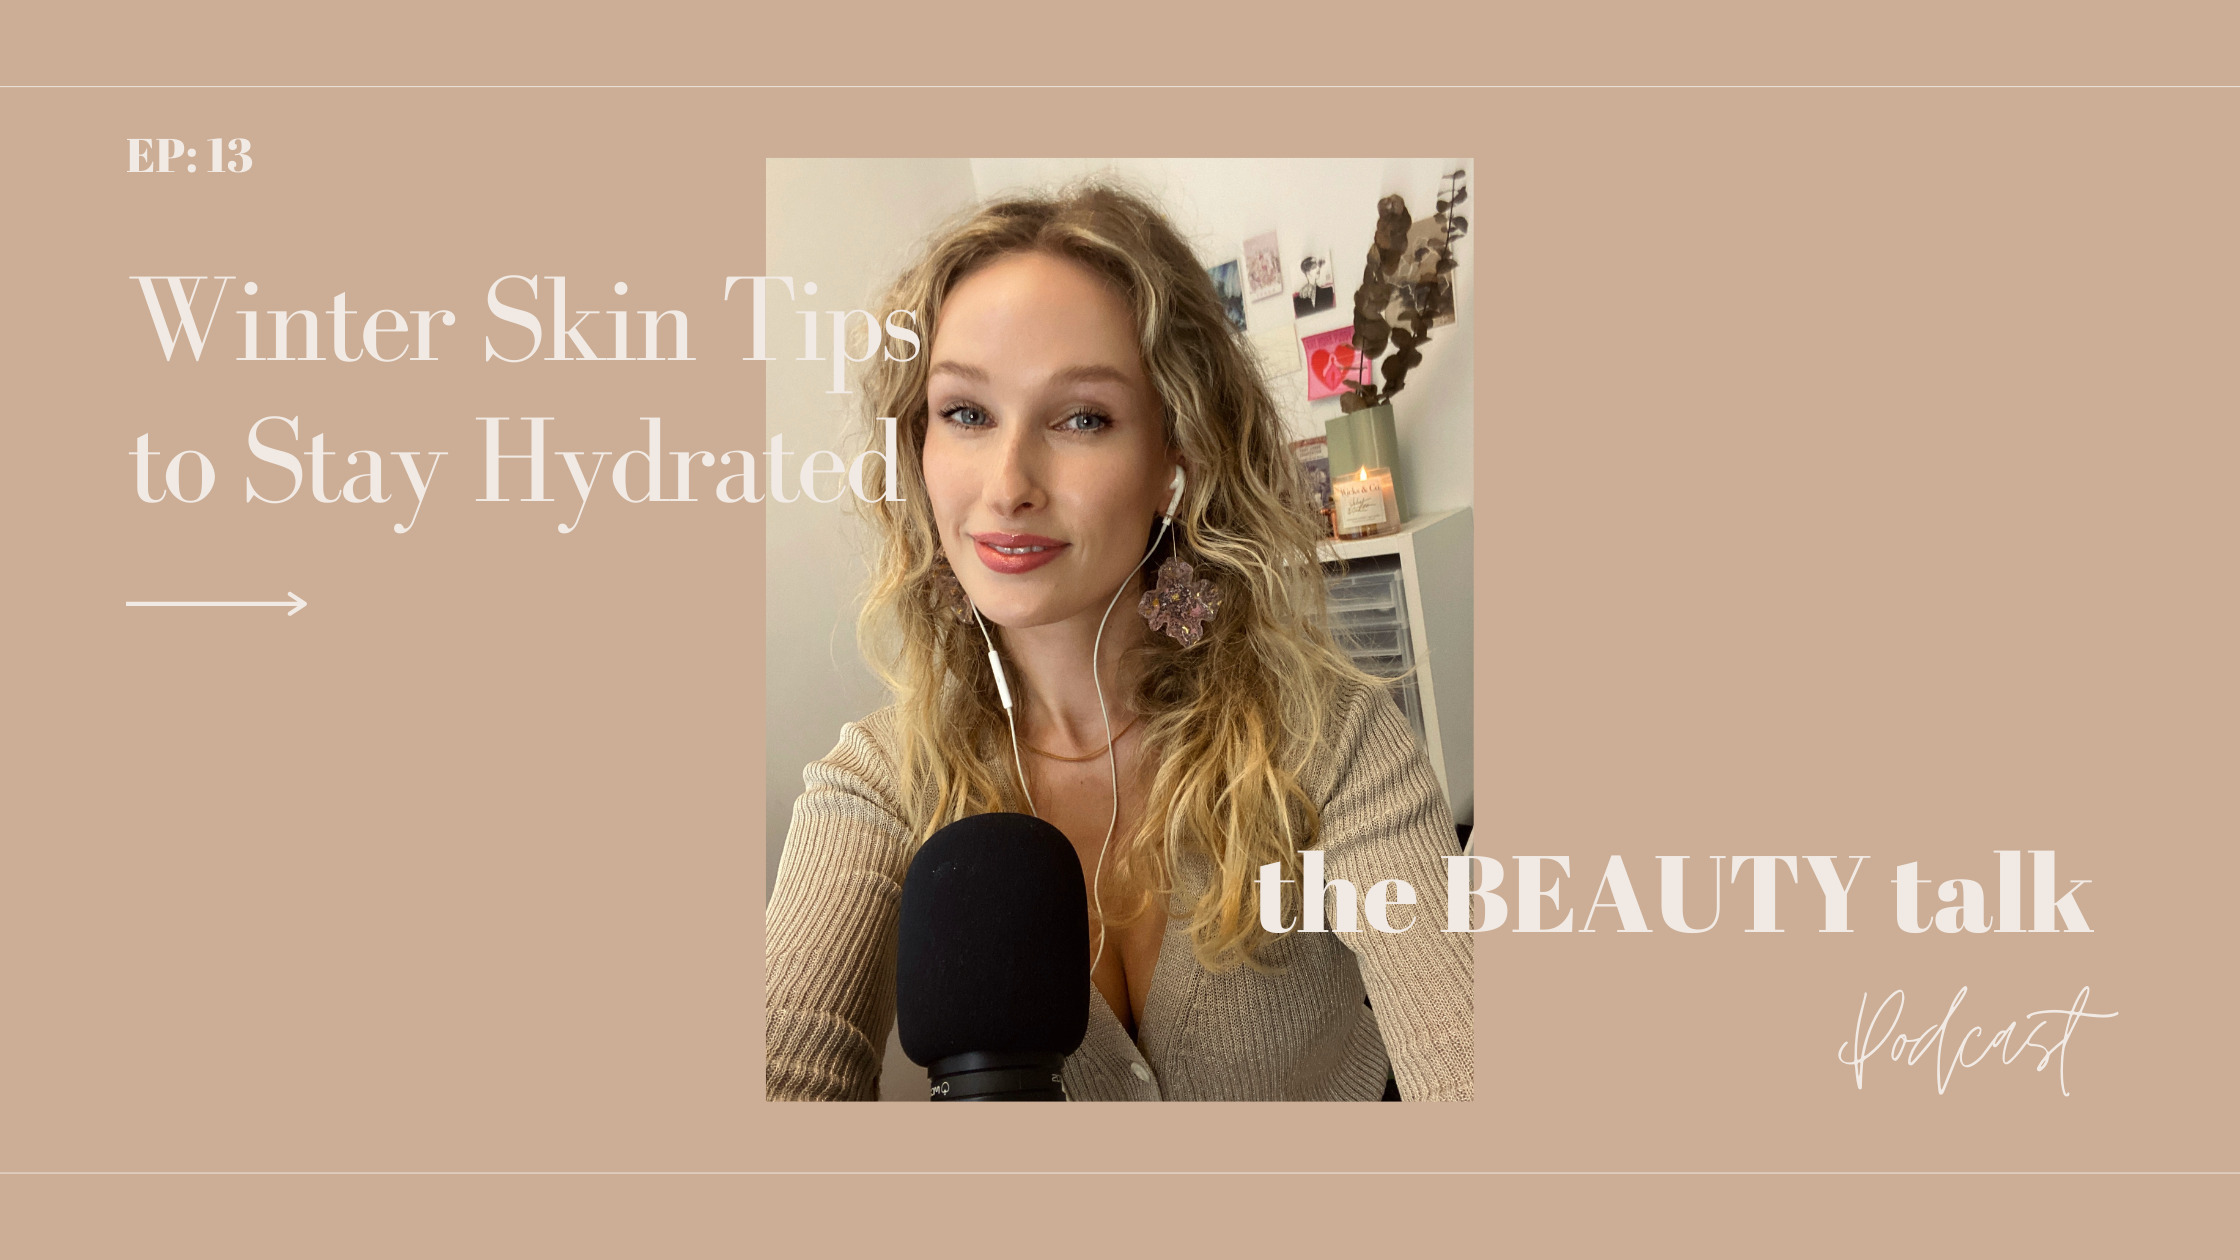 EP: 14 Winter Skin Tips to Stay Hydrated